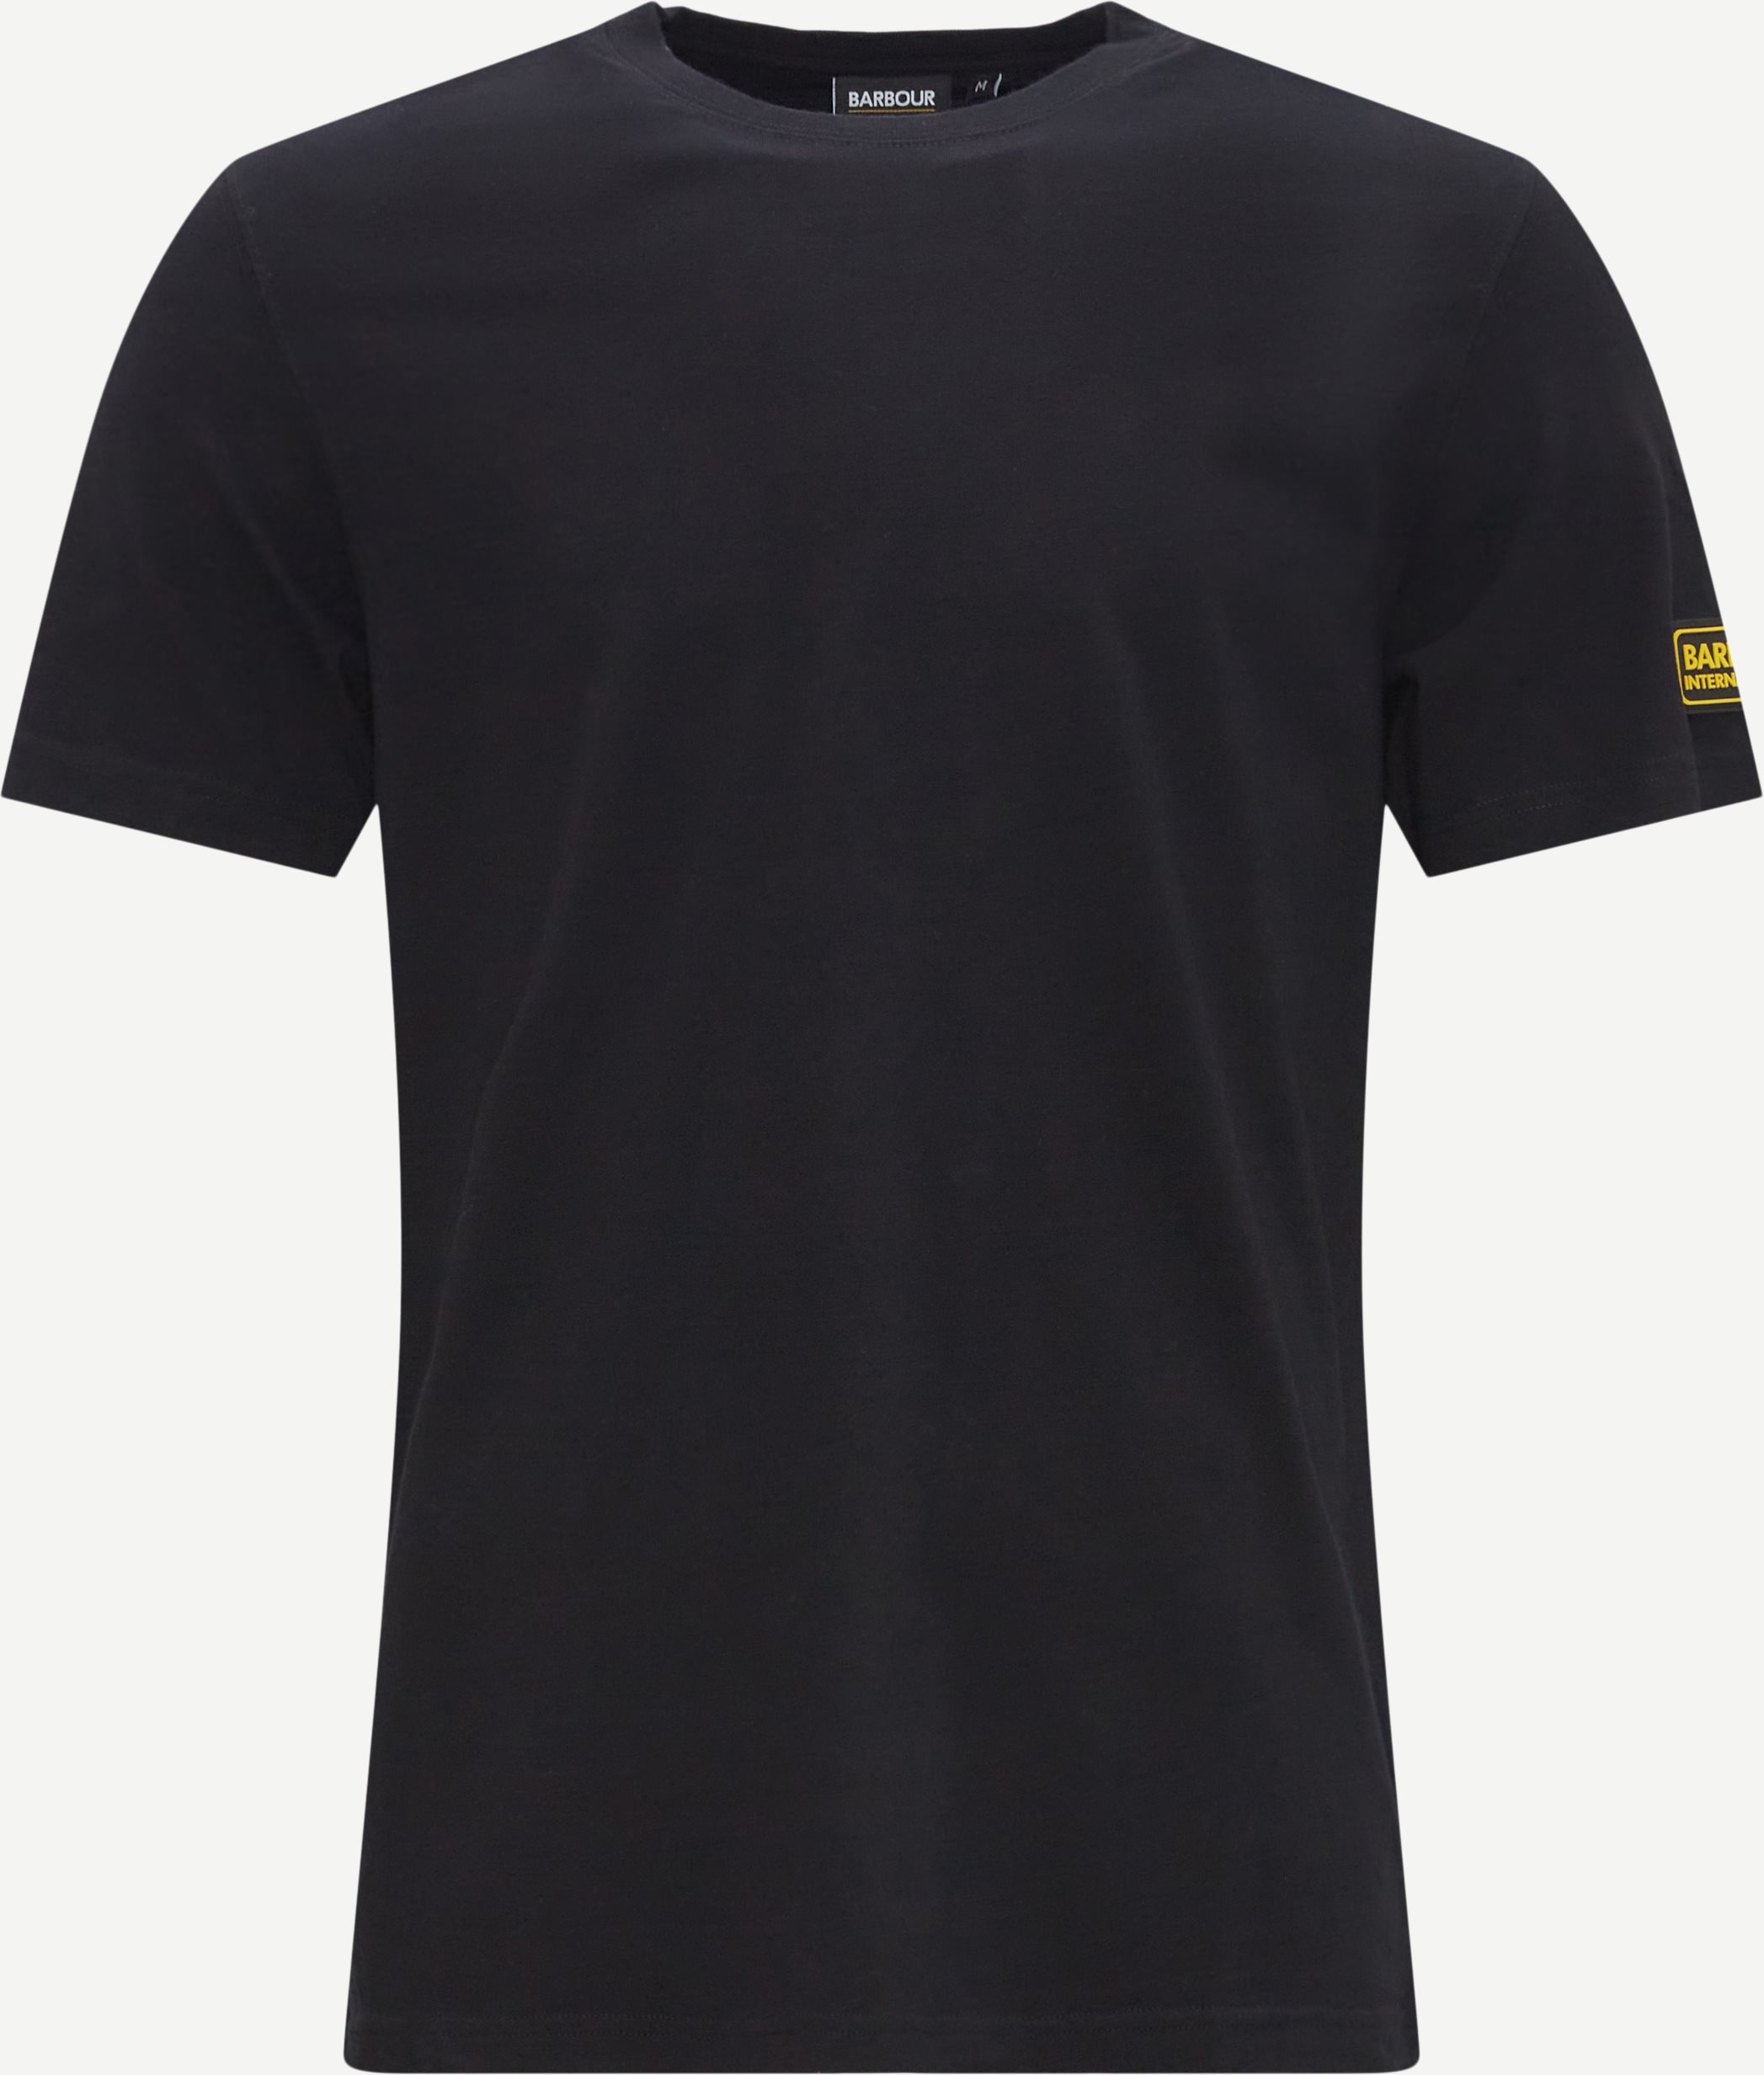 Barbour T-shirts DEVICE TEE Black